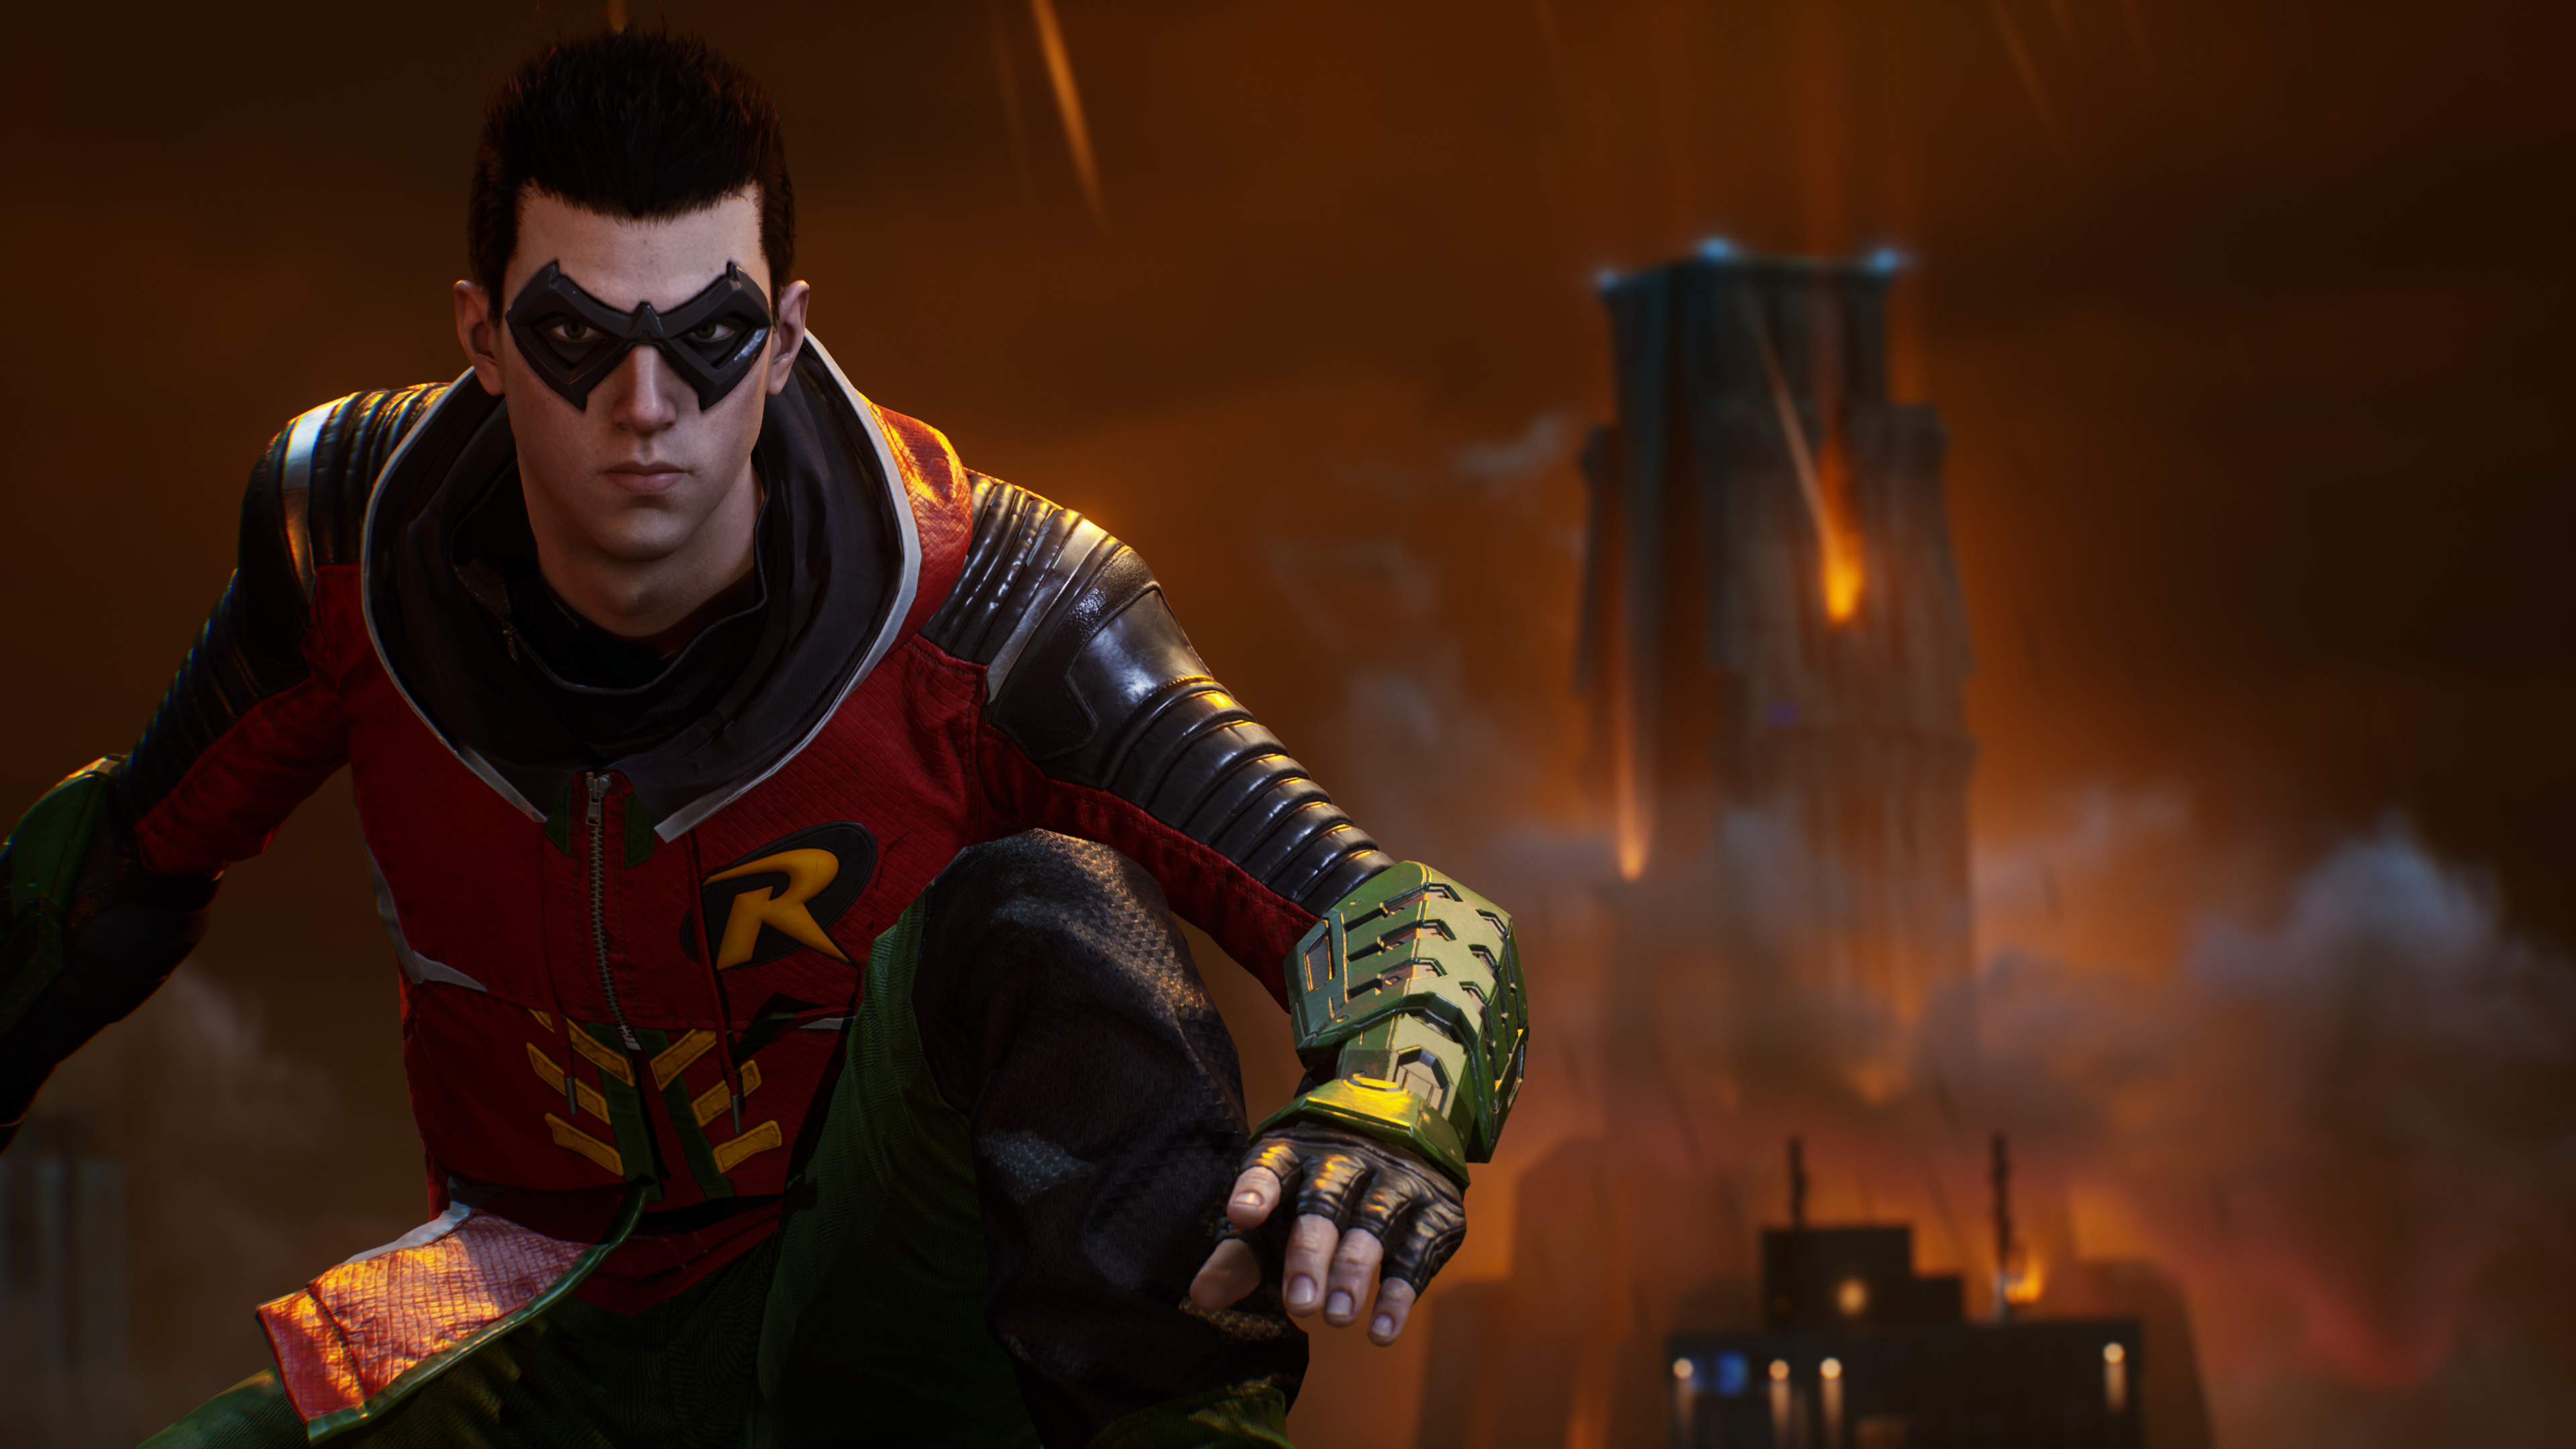 Gotham Knights (Game): Robin, The youngest of the four playable characters. 3840x2160 4K Wallpaper.